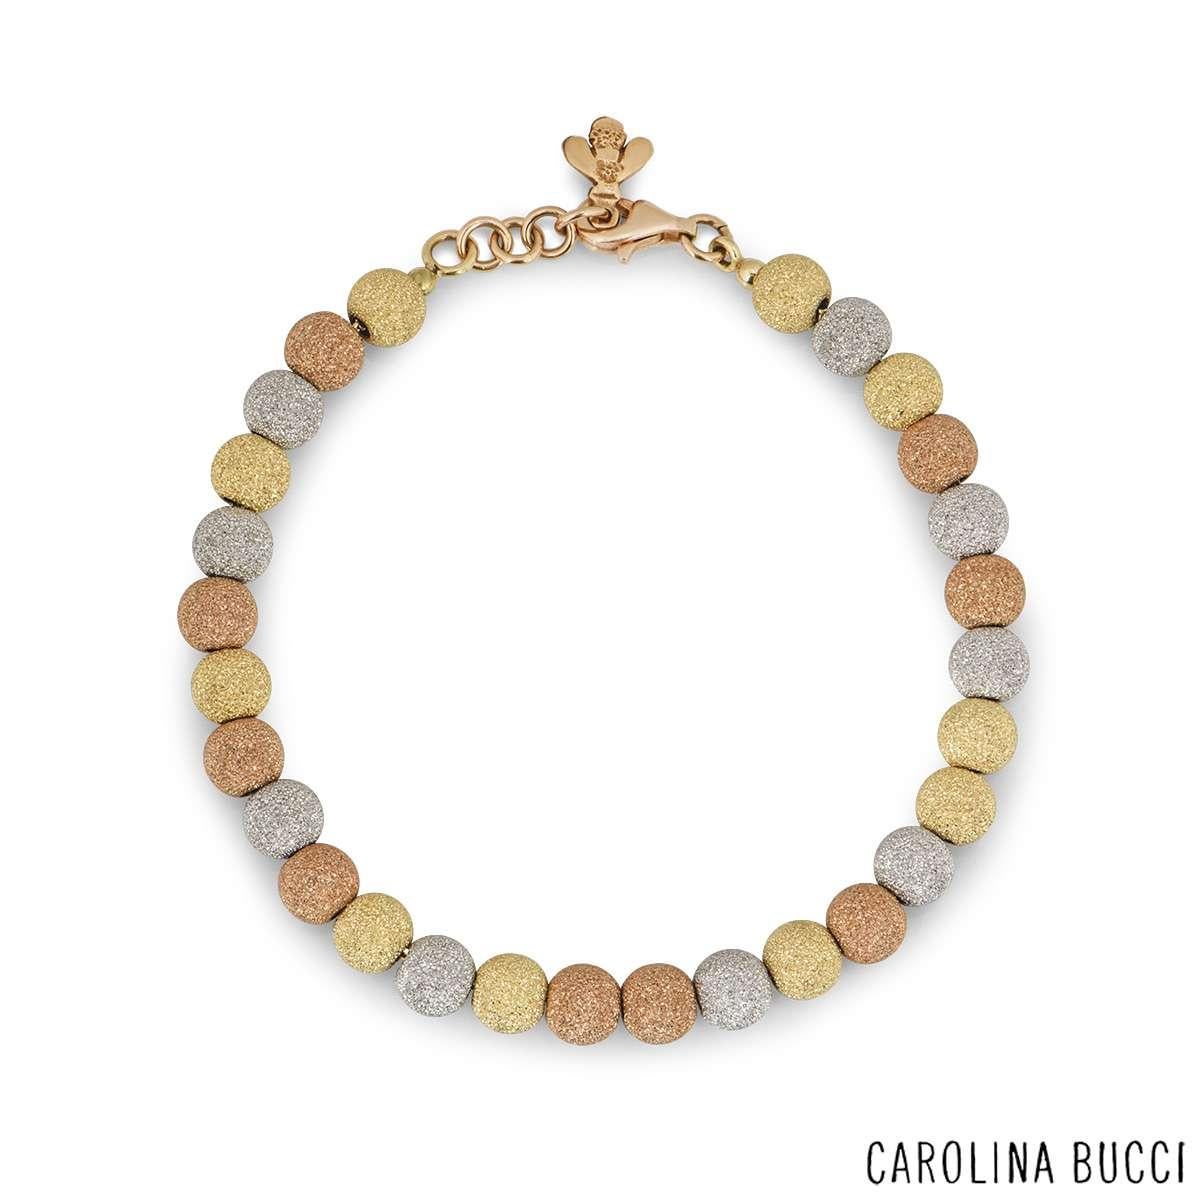 An 18k tri-colour gold bracelet from the Florentine collection by Carolina Bucci. The bracelet has 28 beads in yellow, rose and white gold with a sparkly, textured finish. The bracelet measures 7 inches in length and has a lobster clasp with a bee